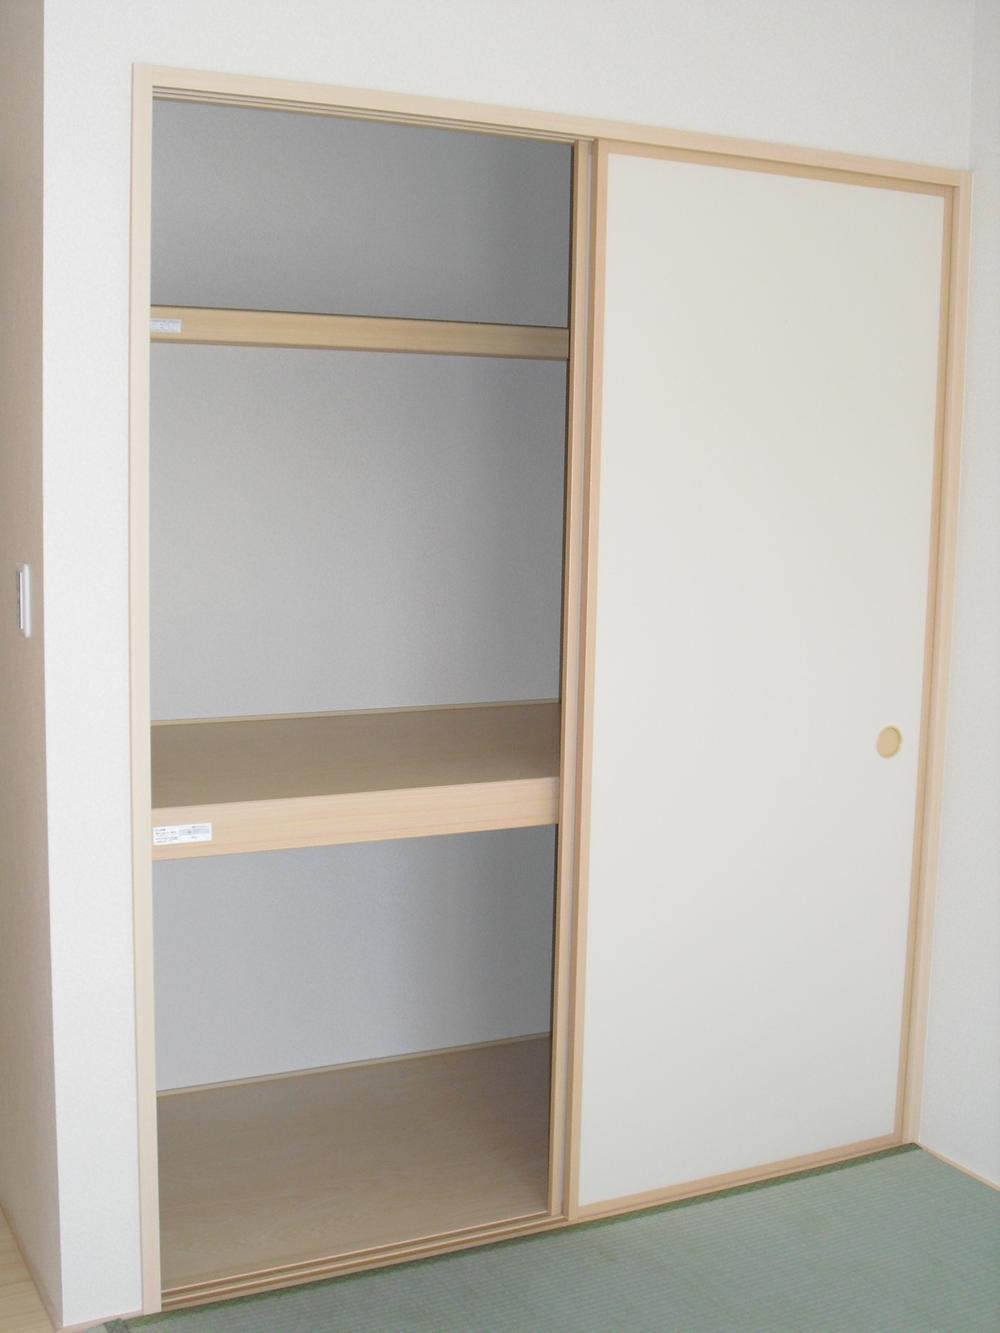 Other introspection. Is an image of Japanese-style storage